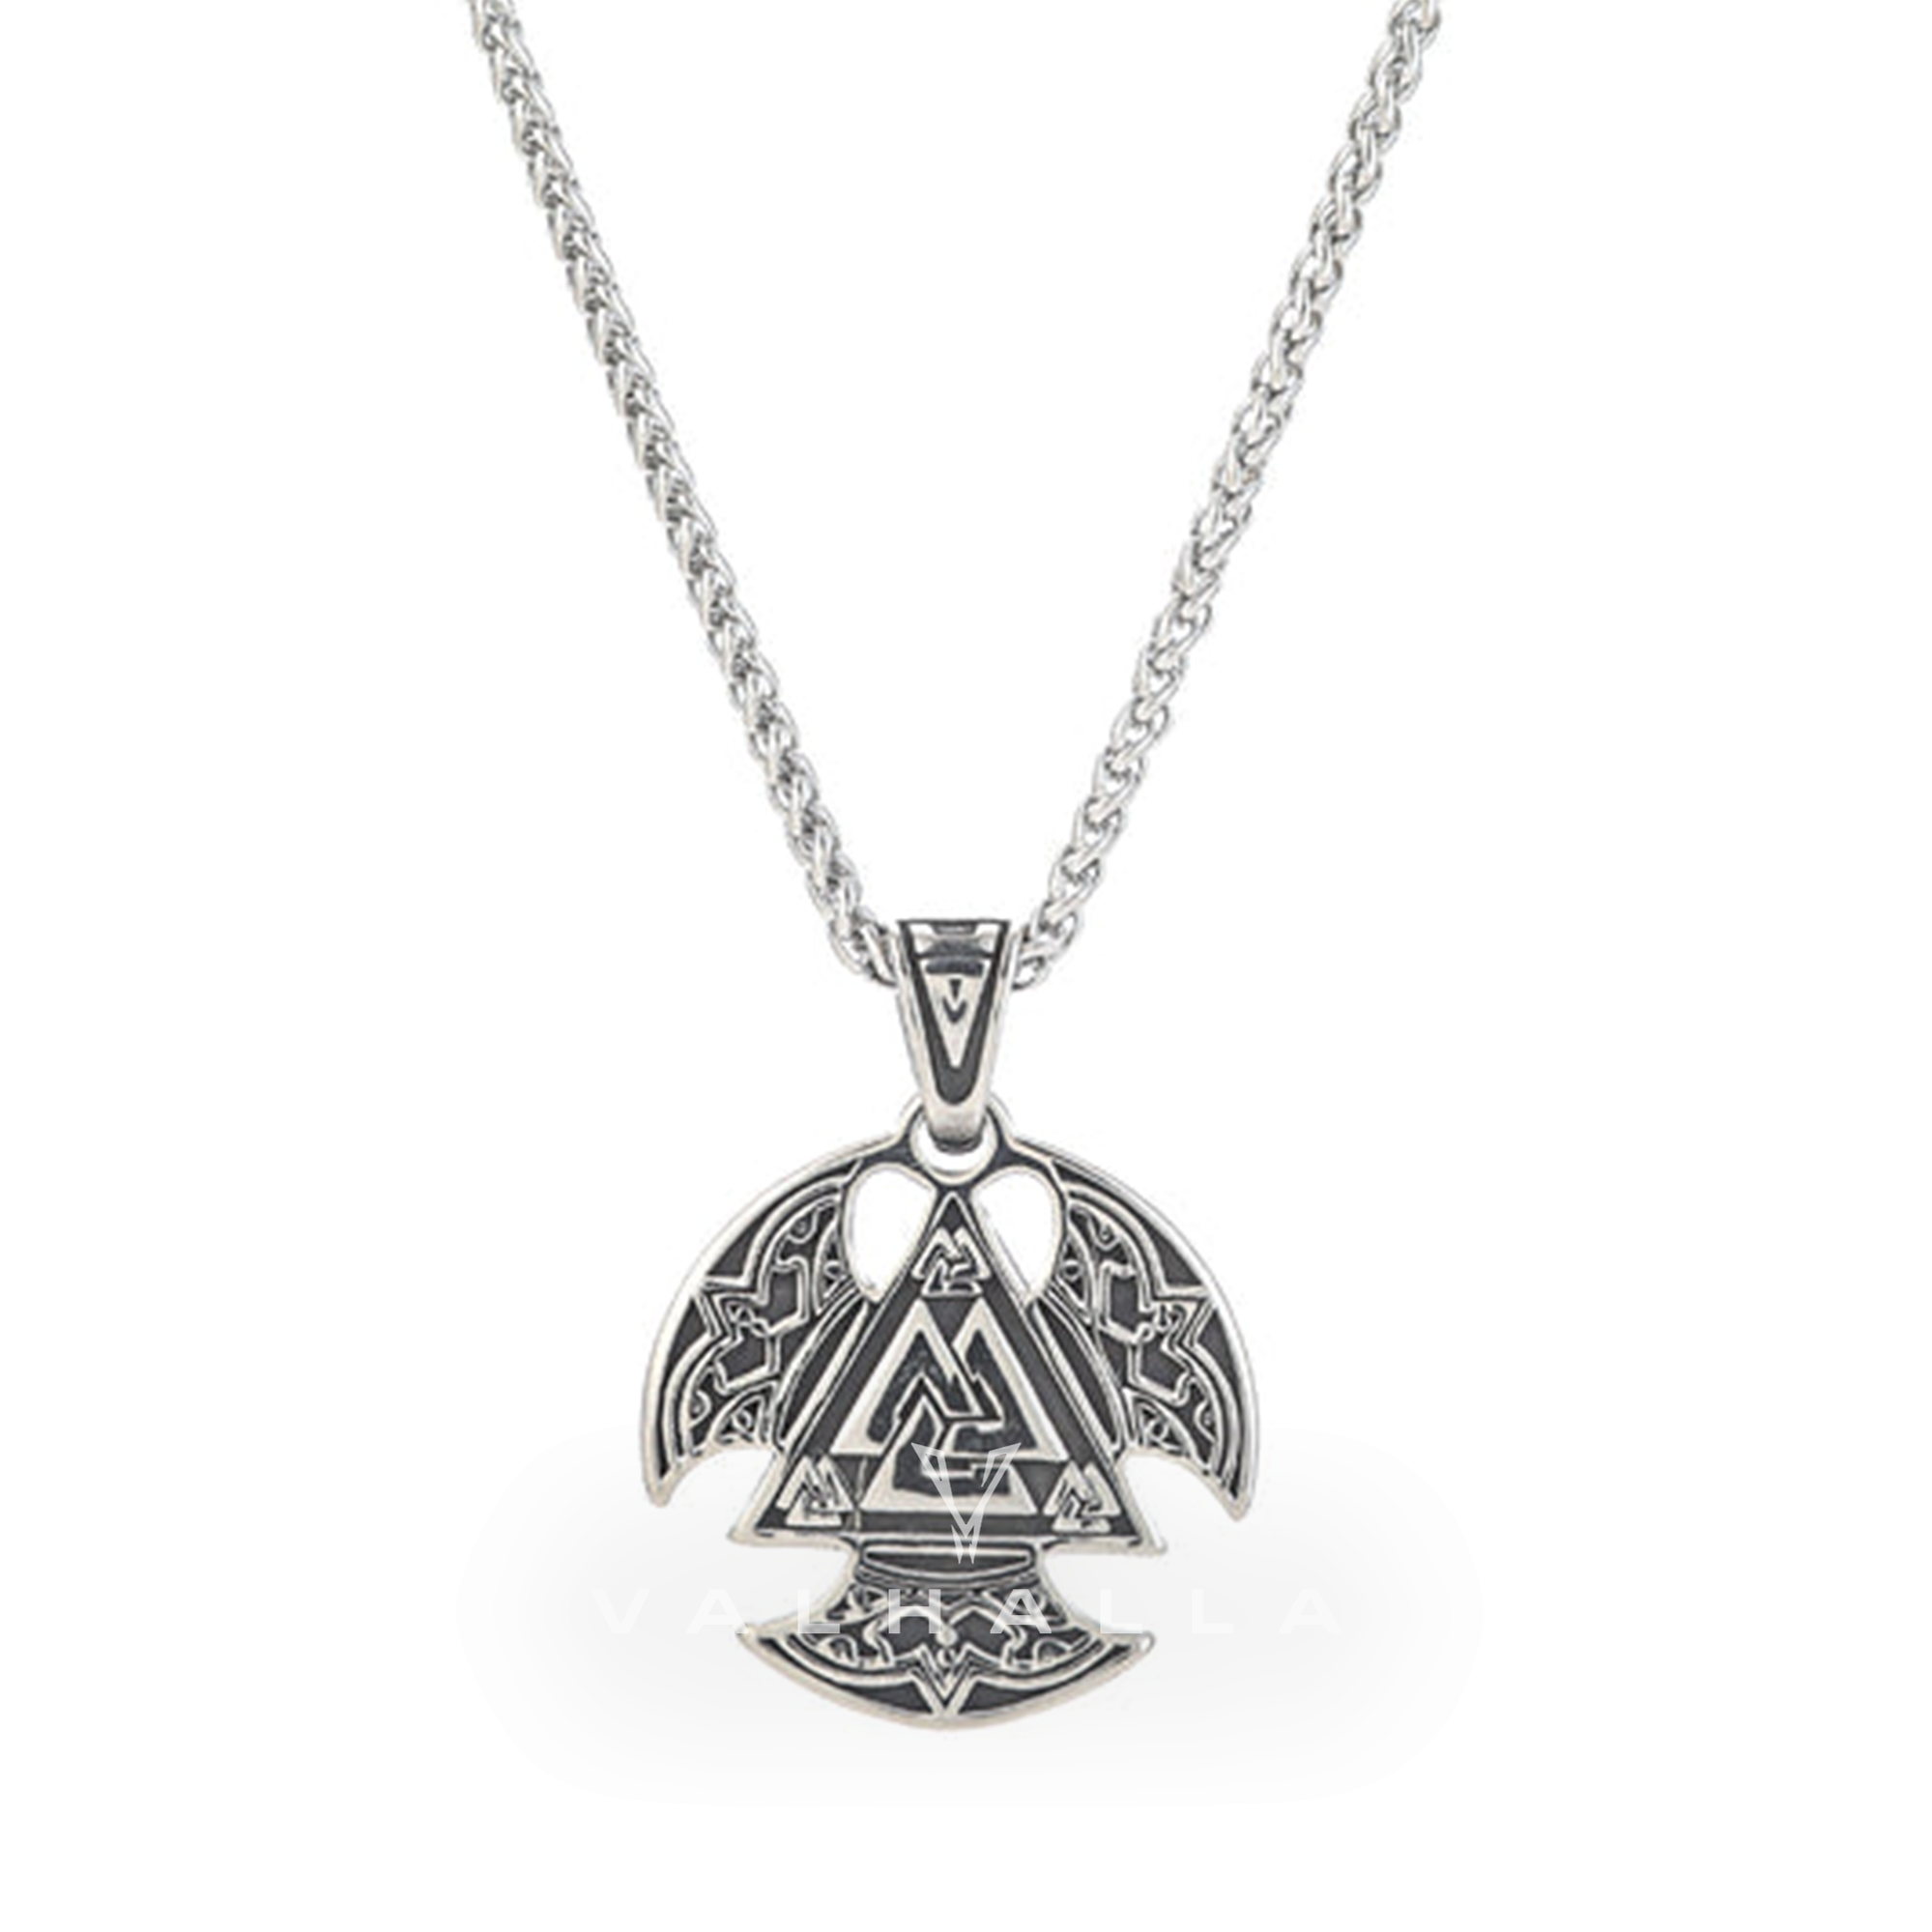 Circular Handcrafted Stainless Steel Valknut Axe Head Pendant & Chain